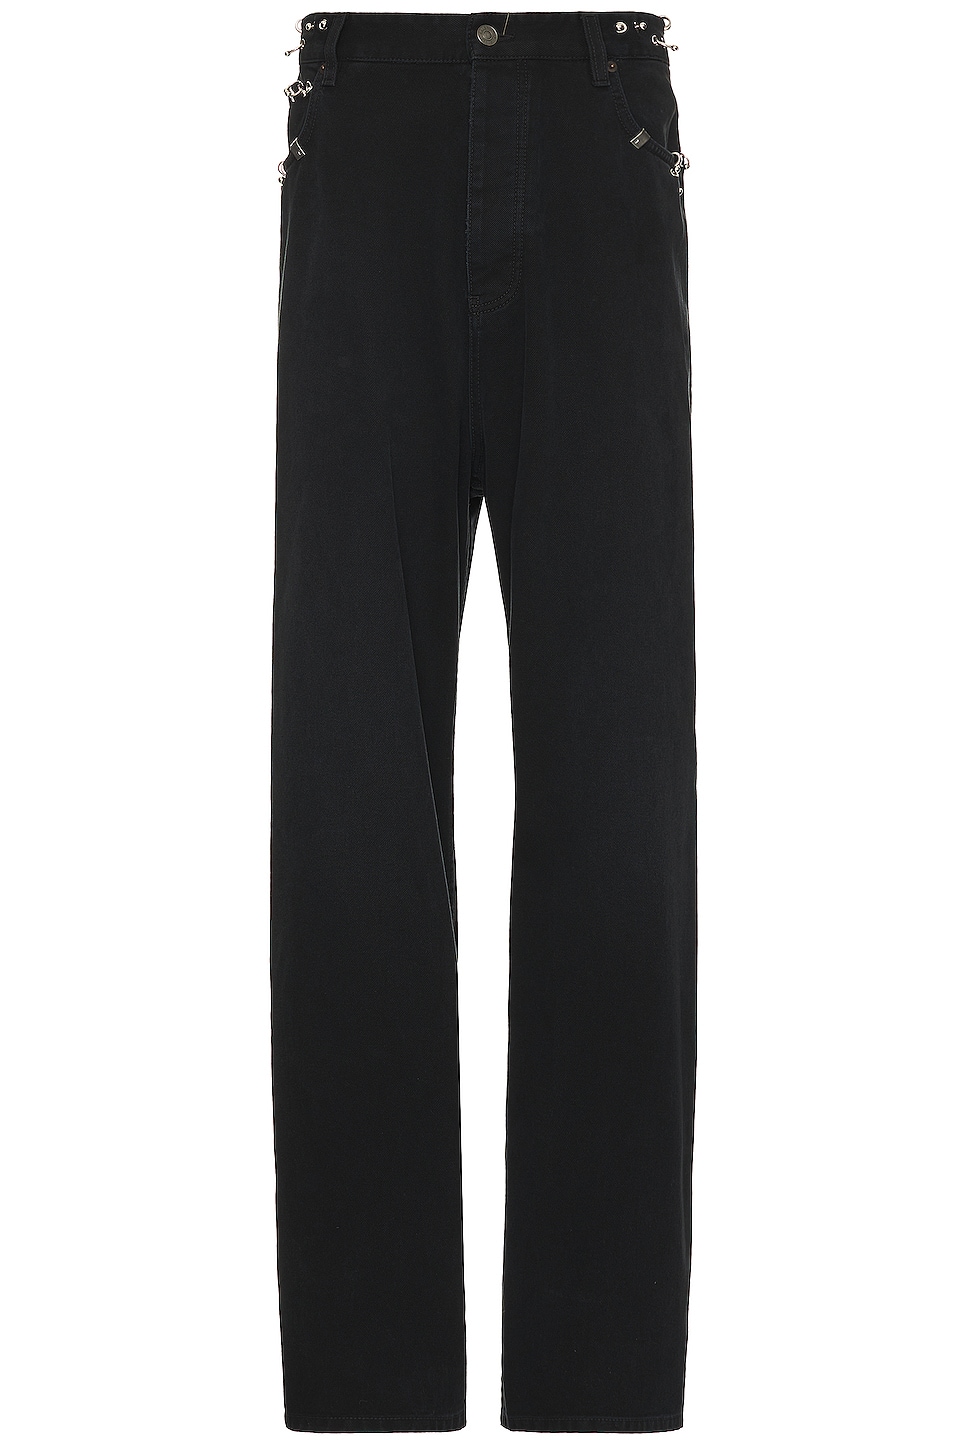 Image 1 of Balenciaga Pierced Baggy Pant in Sunbleached Black